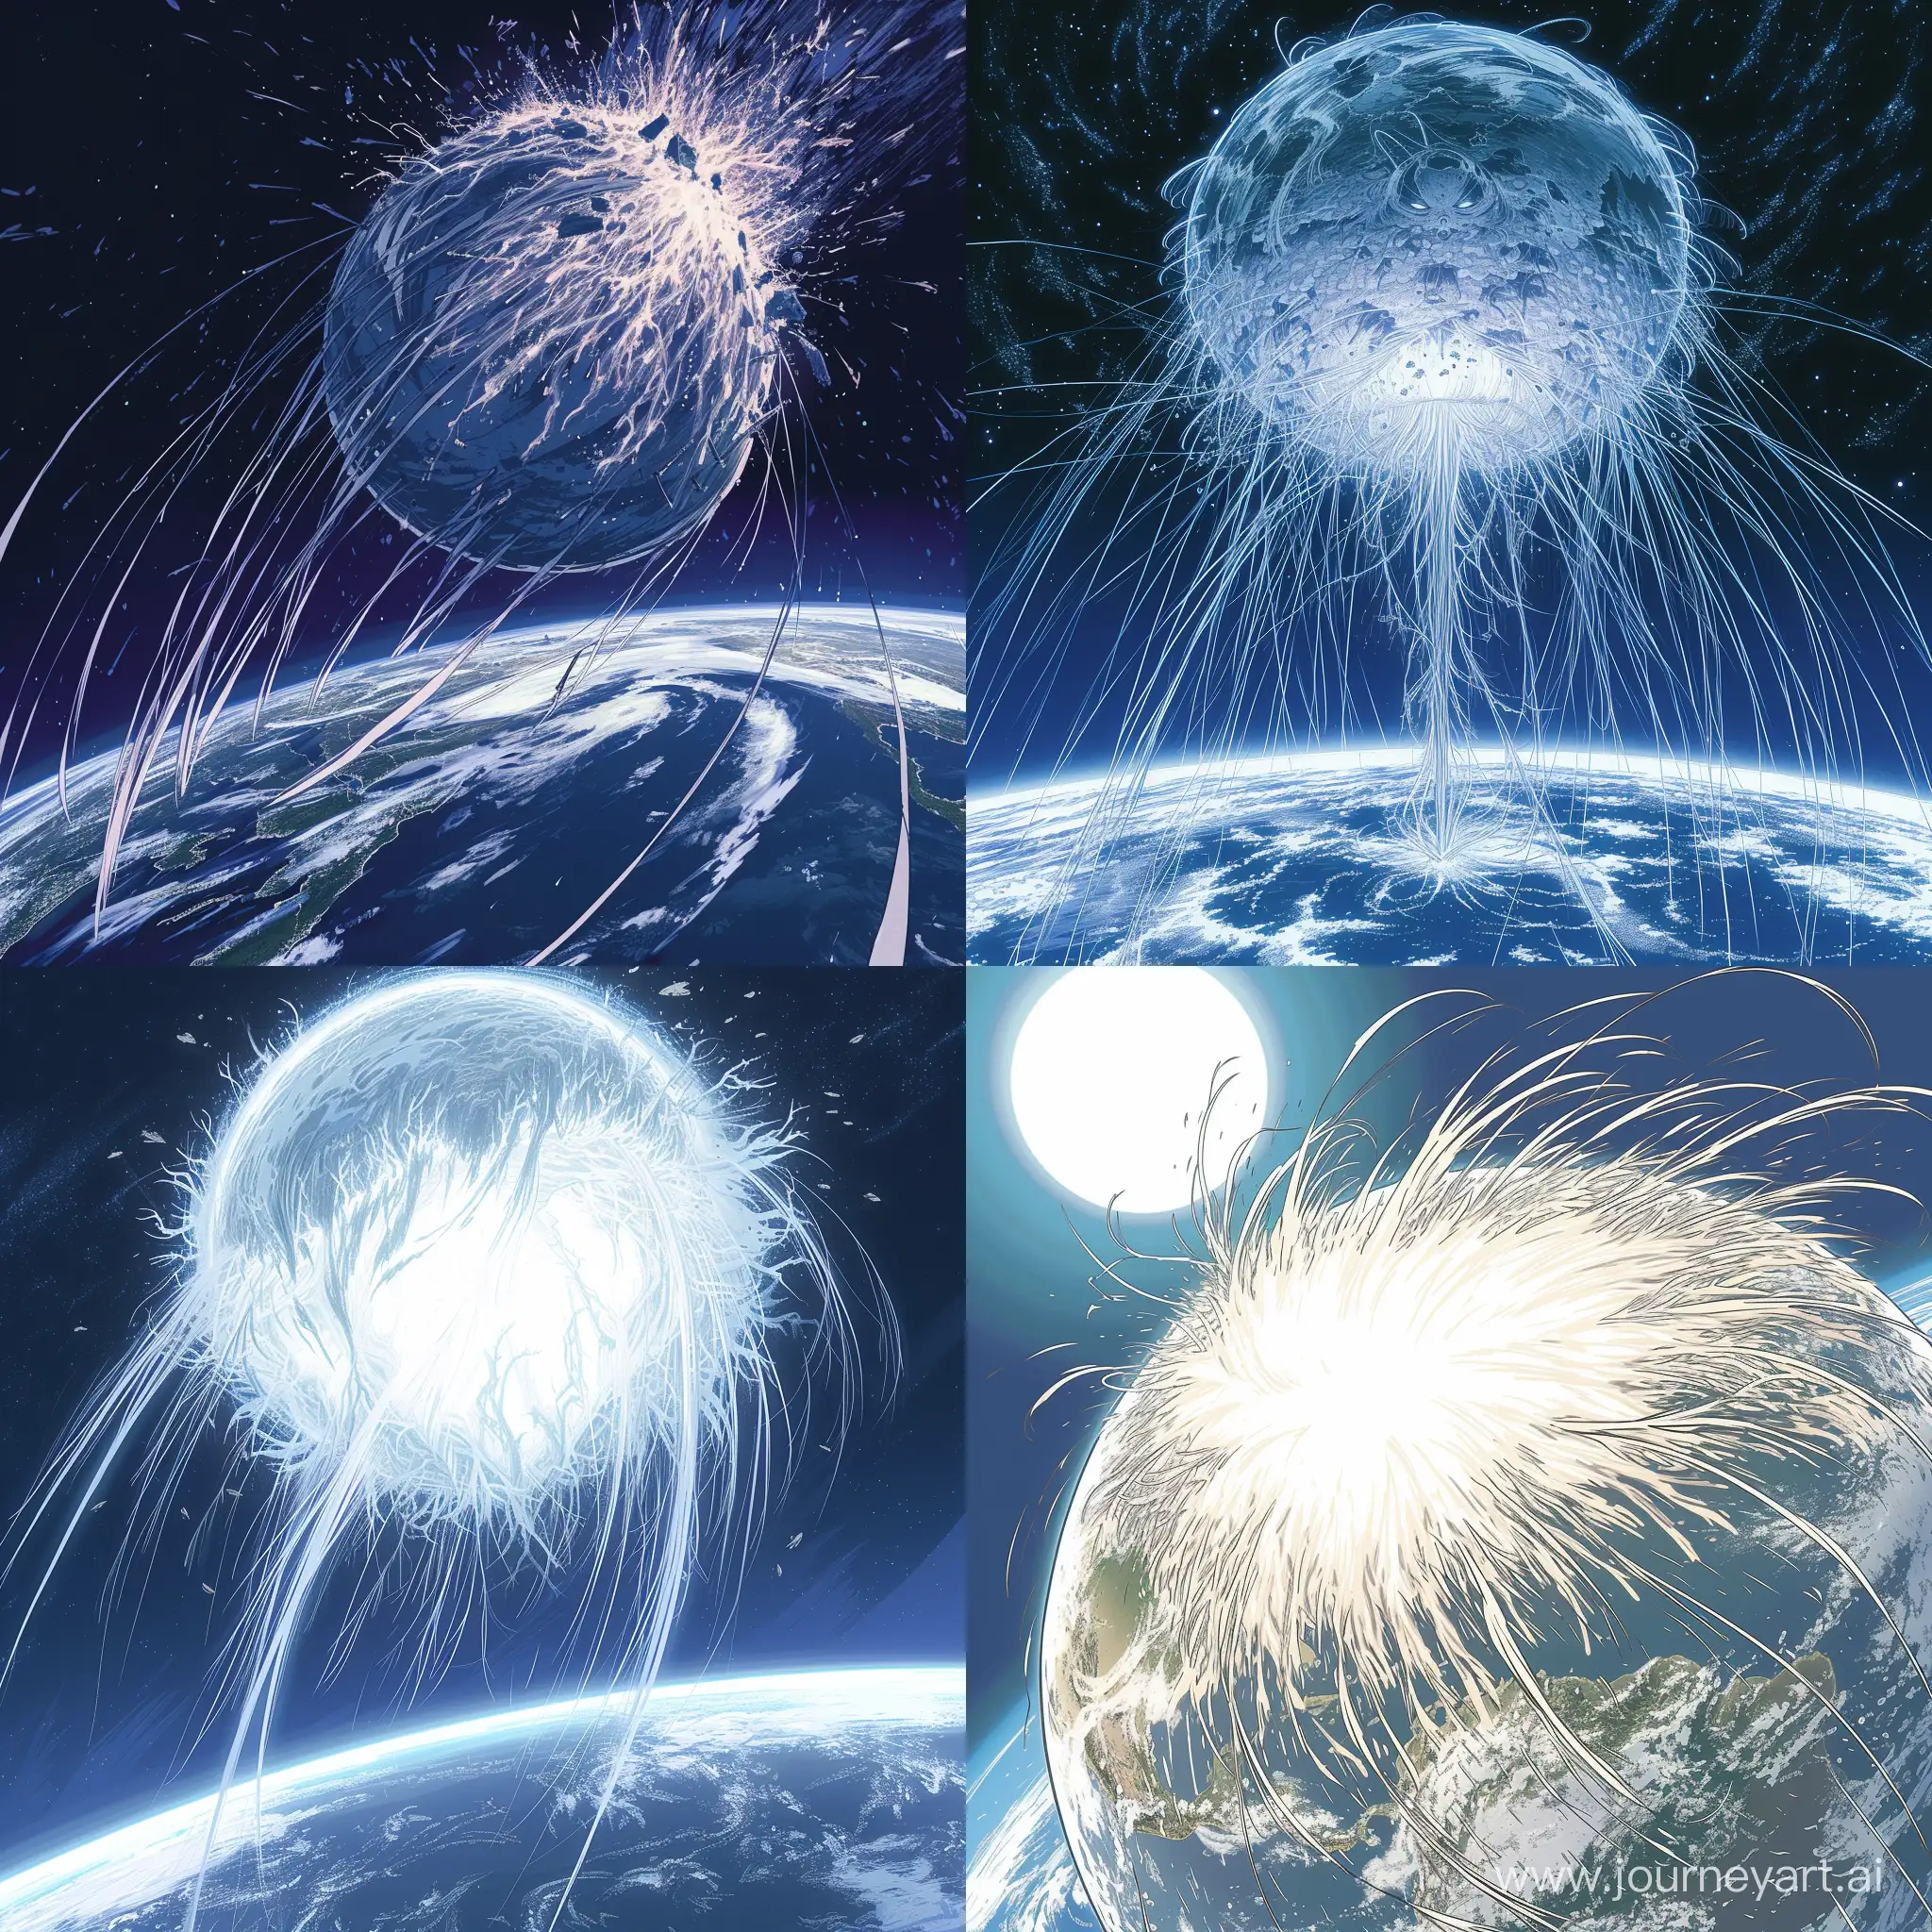 AnimeStyled-Sphere-of-Destructive-Energy-Connecting-with-Earth-Threads